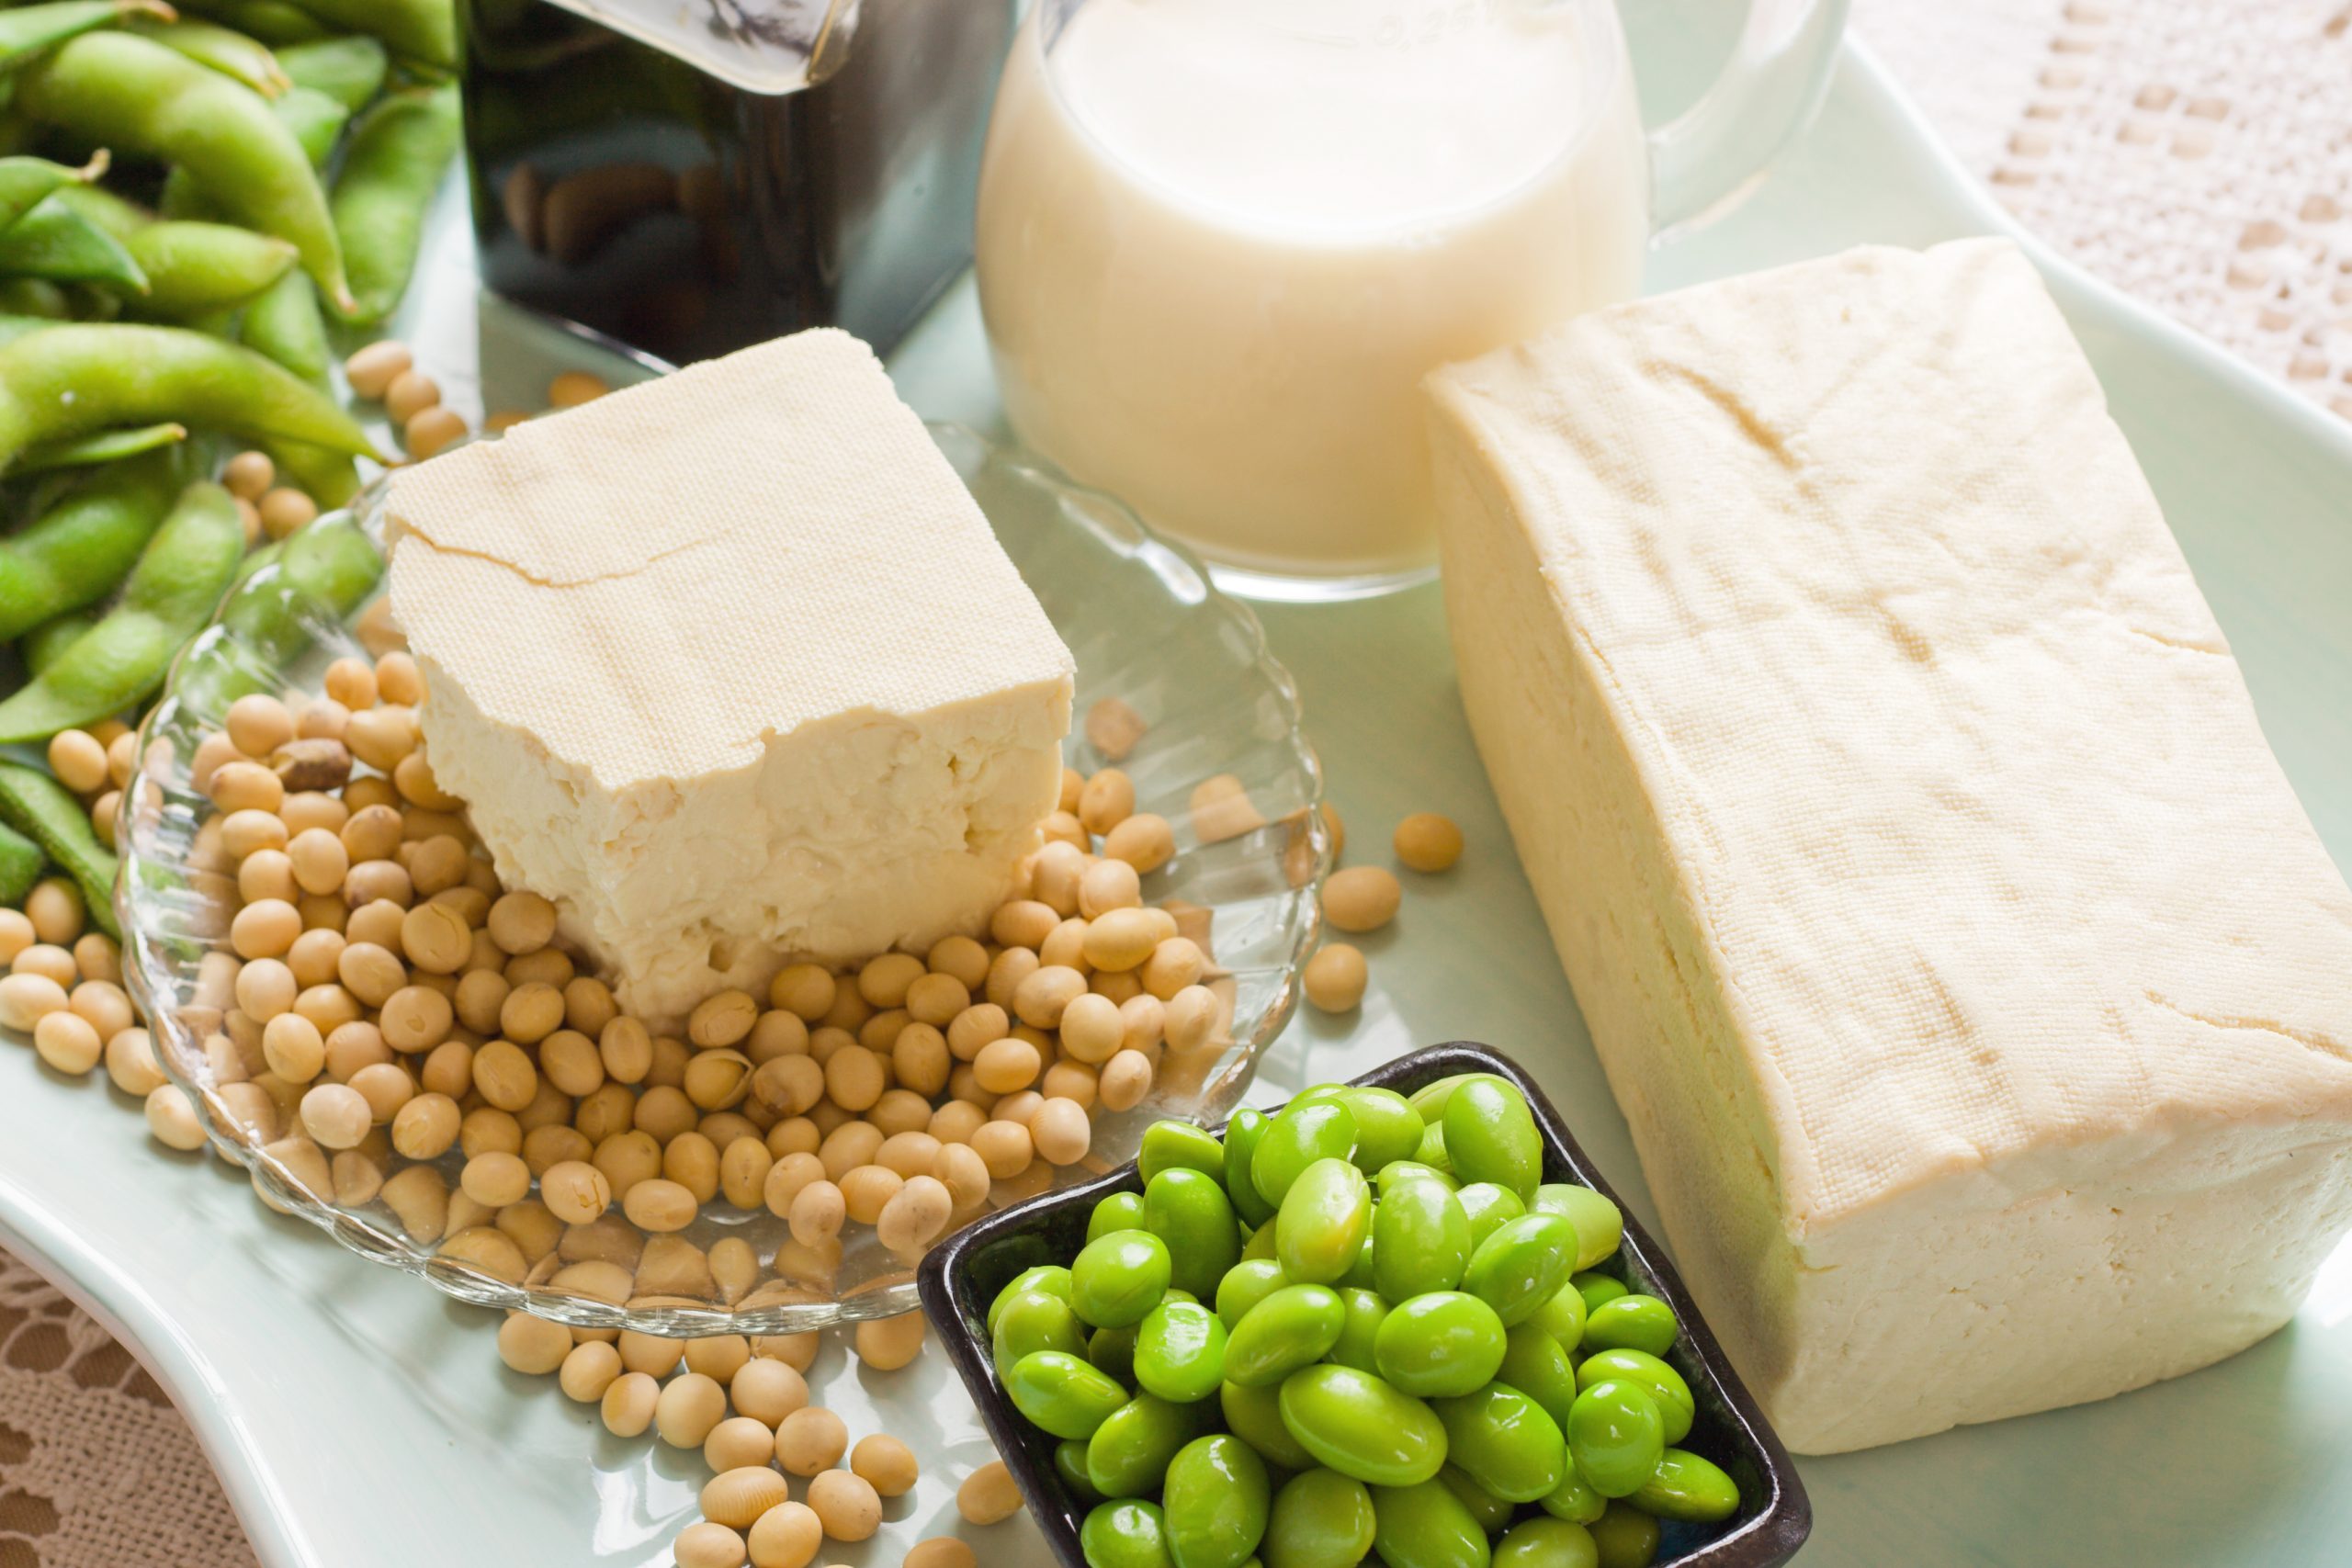 Is Eating Soy Good or Bad for You?